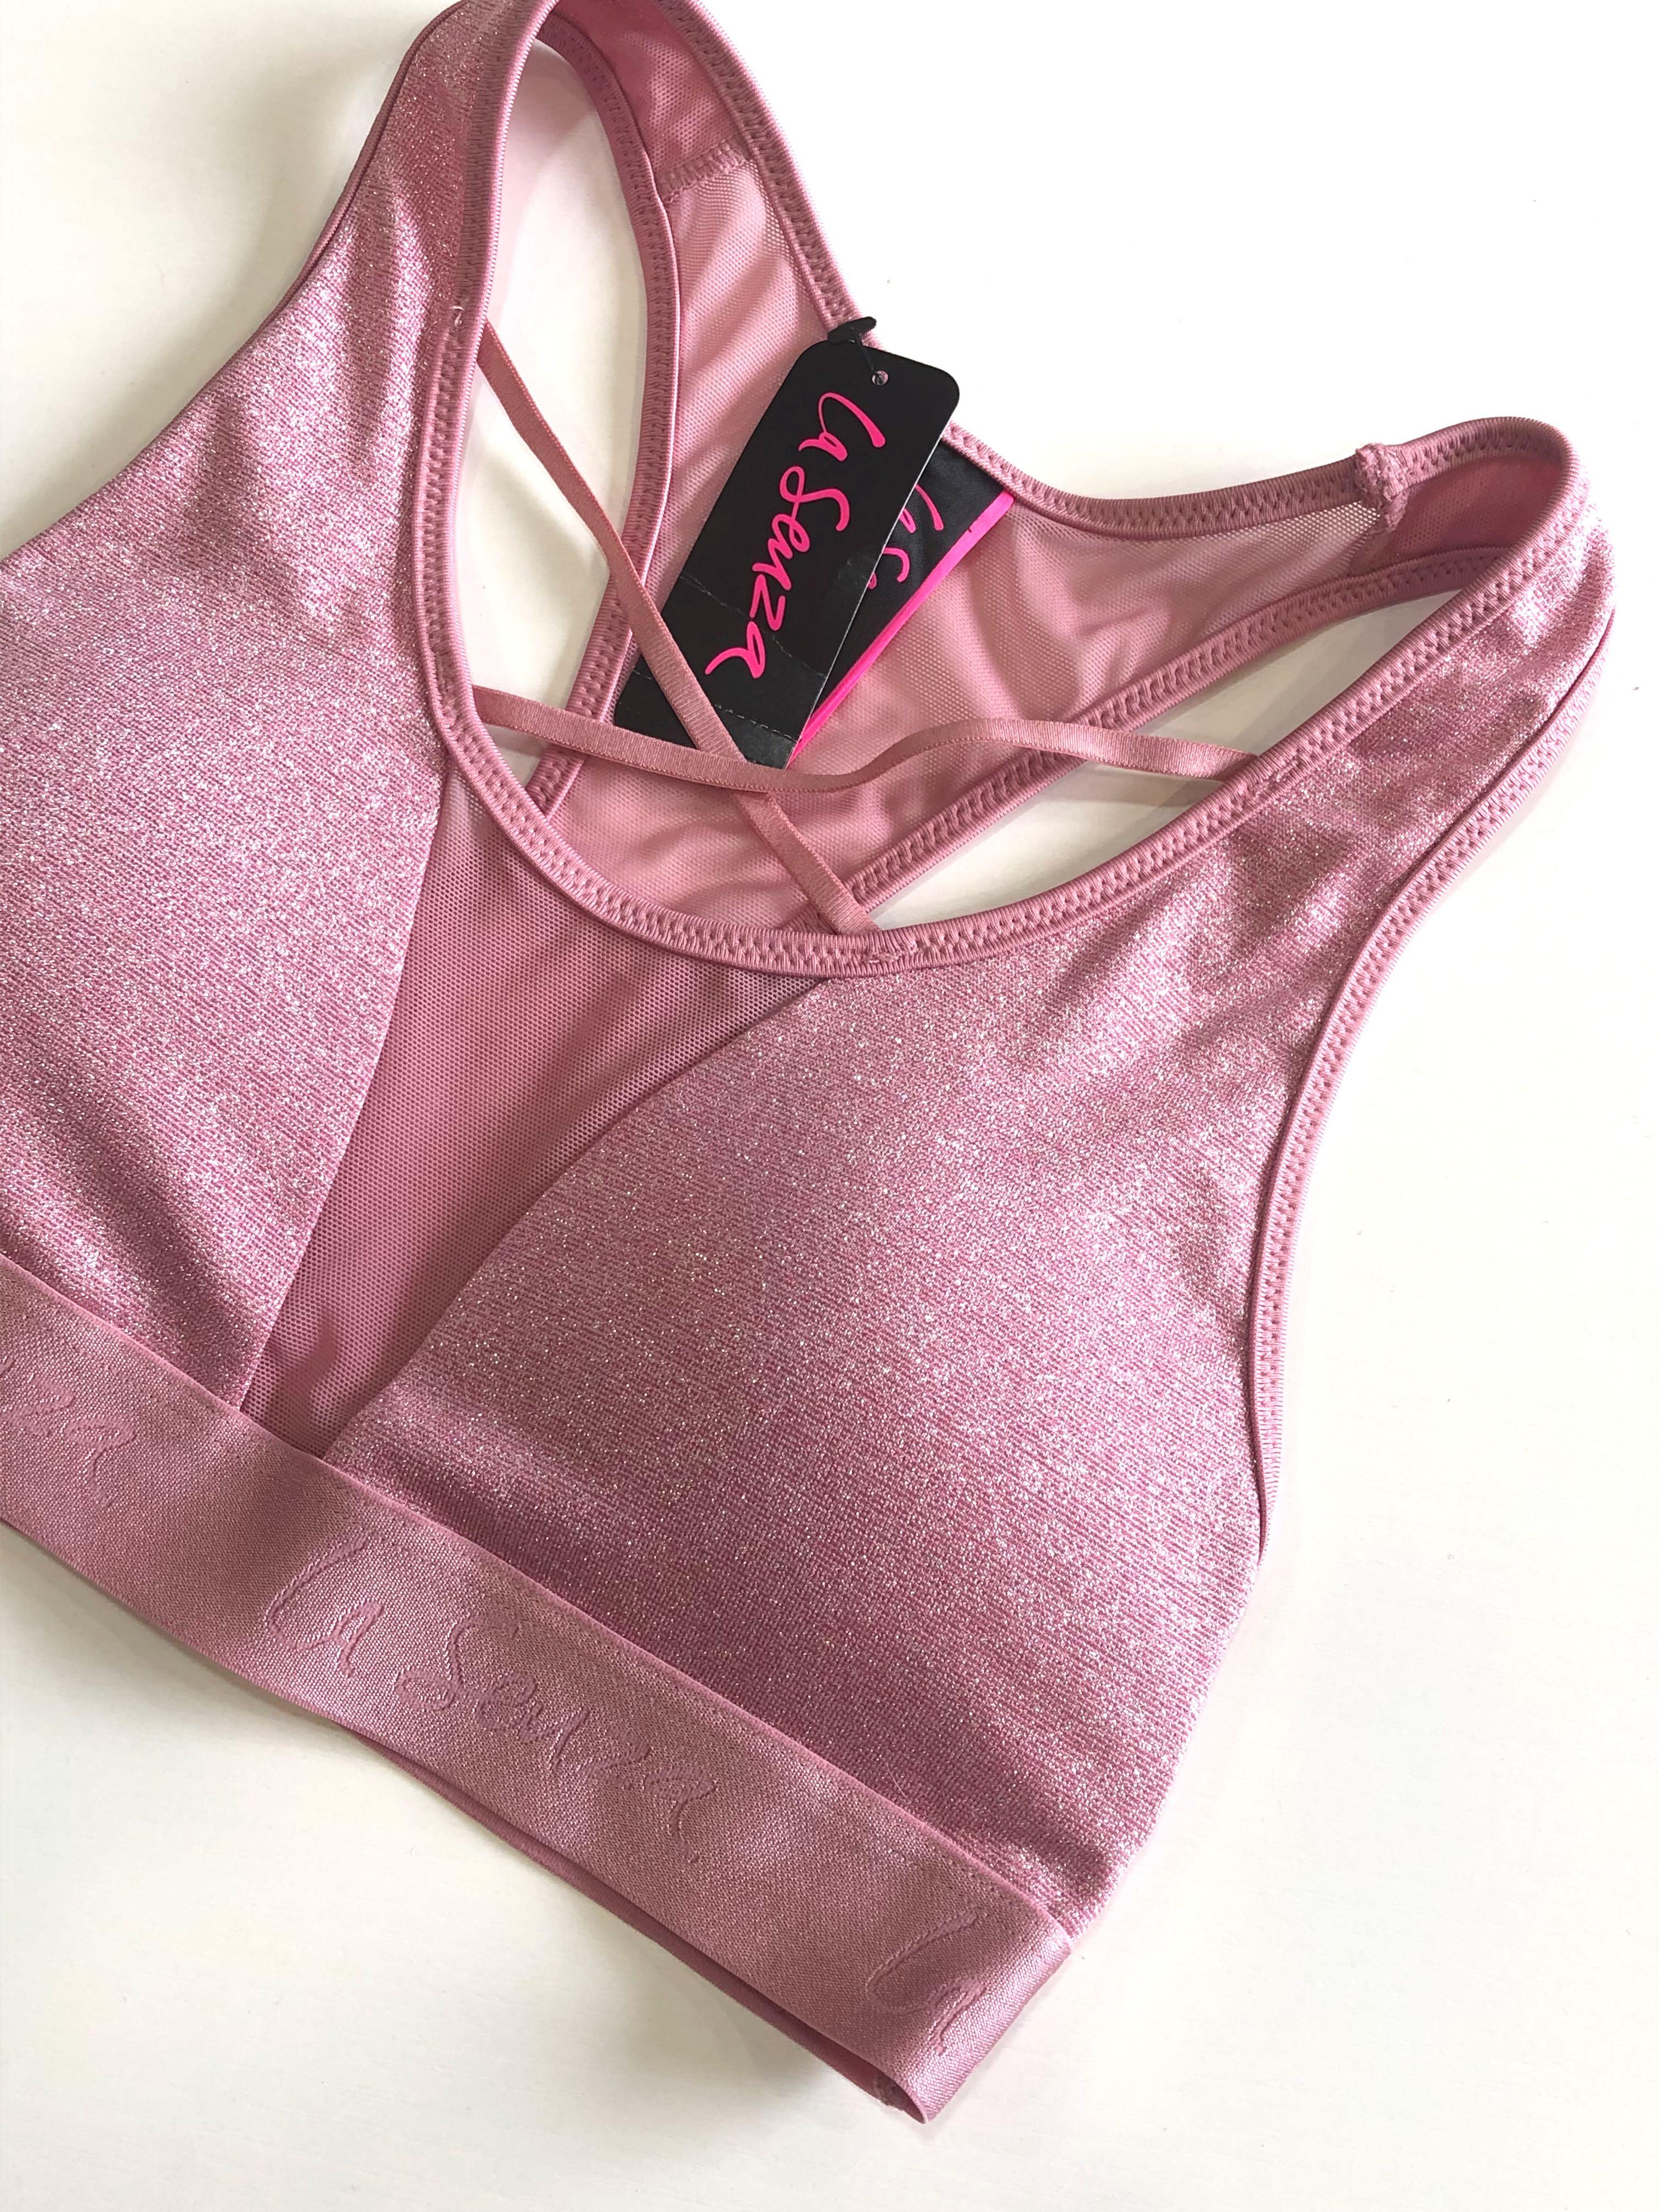 La Senza Sparkling Pink Strappy Racerback Sports Bra - Pink XS Extra Small,  Women's Fashion, Activewear on Carousell